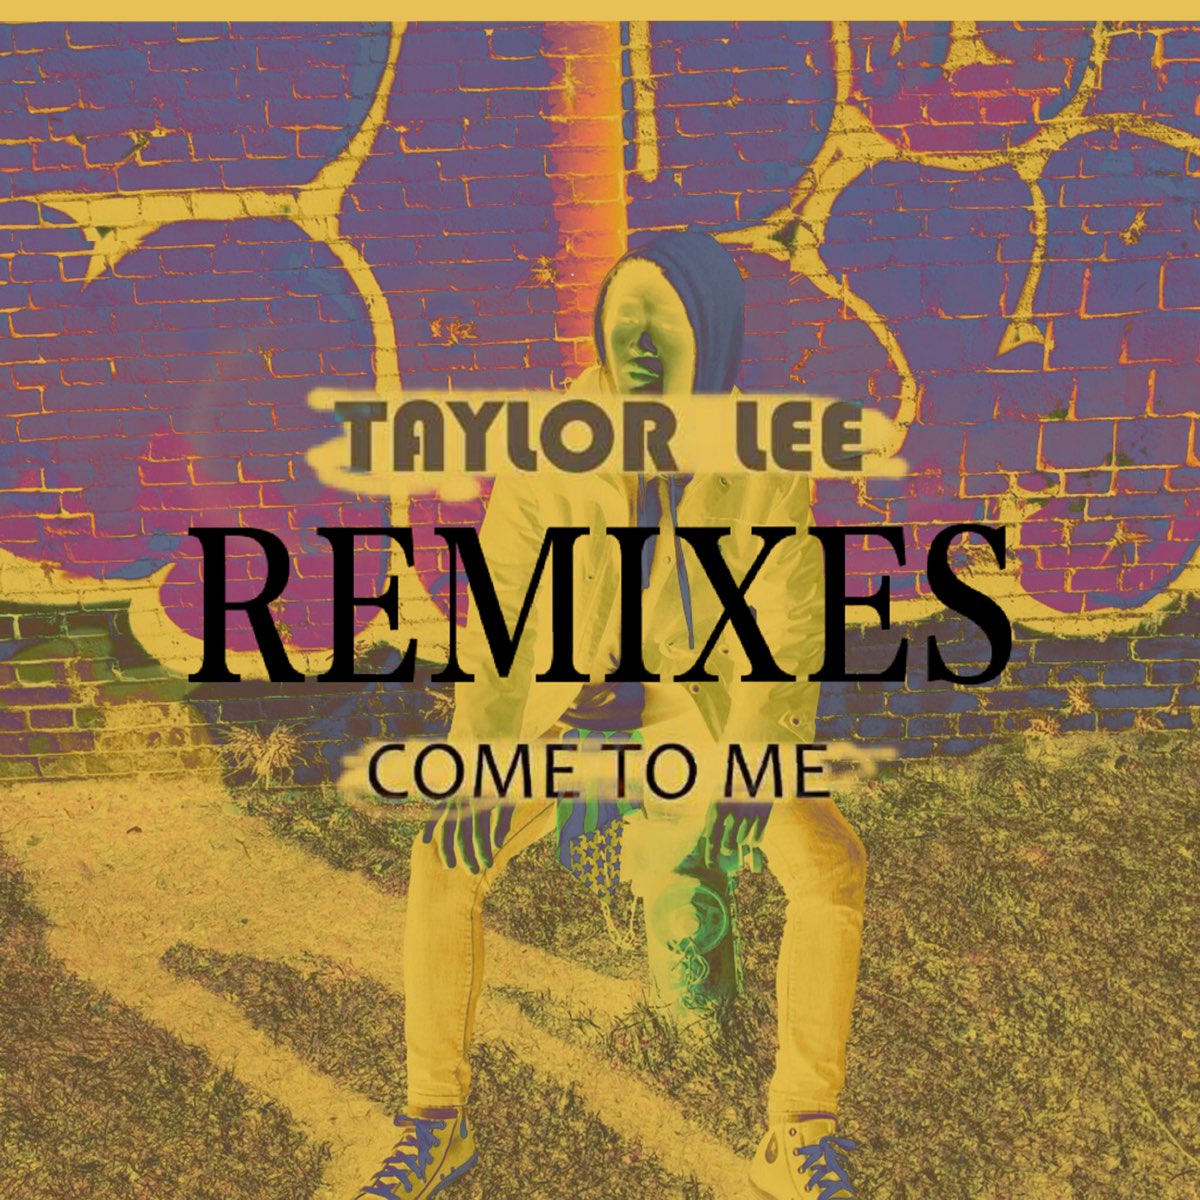 Baby come to me remix